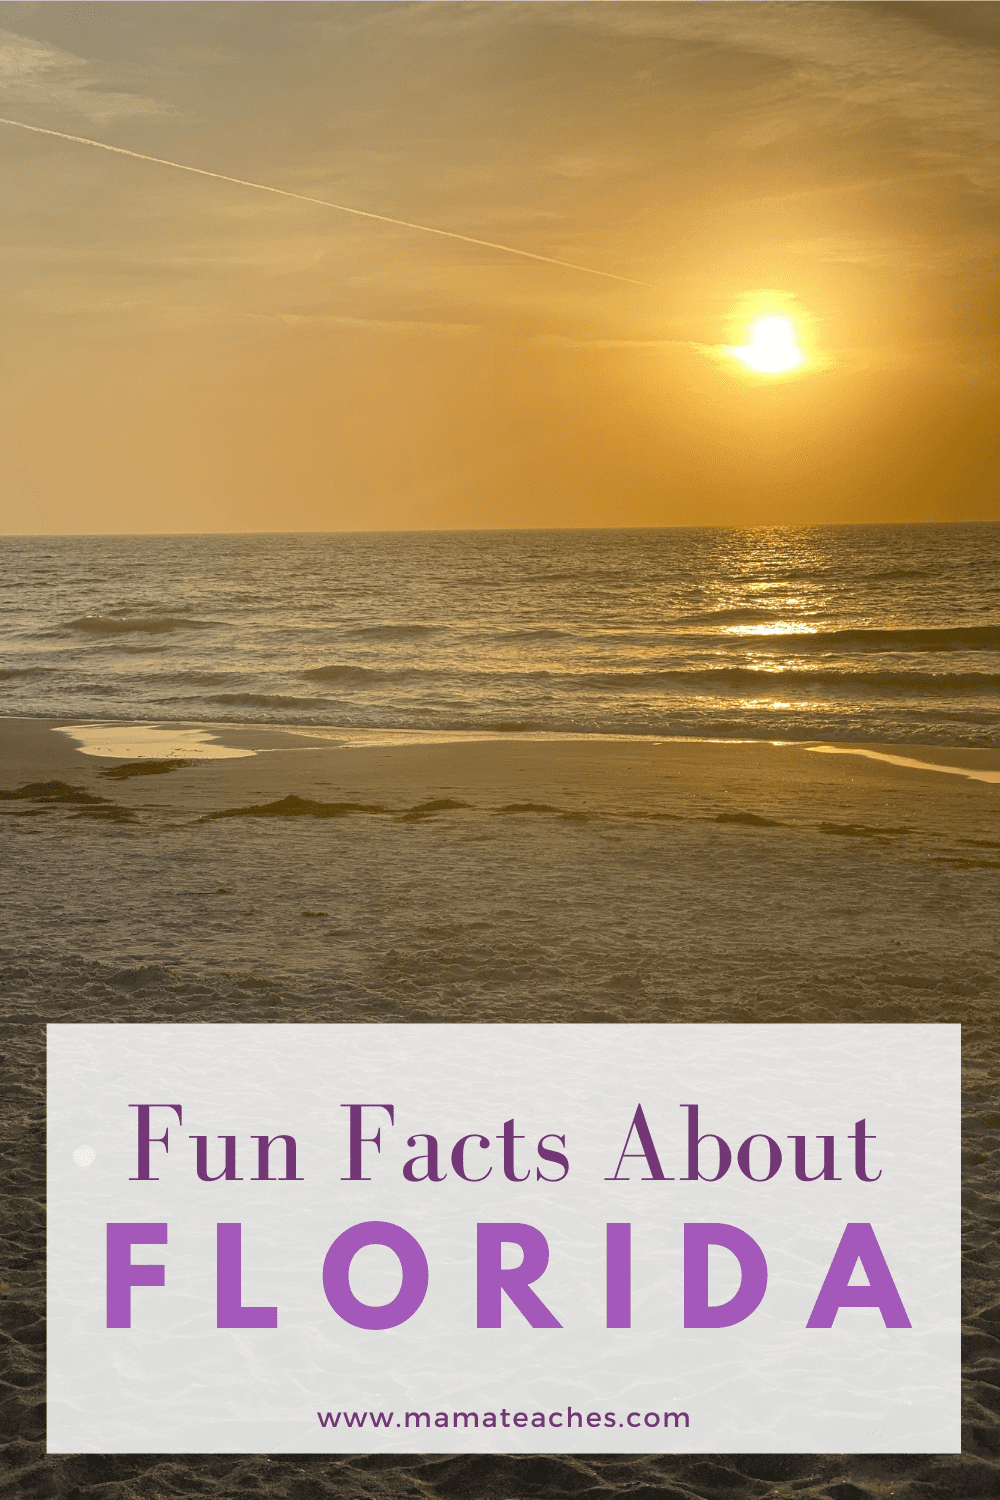 Fun Facts About Florida